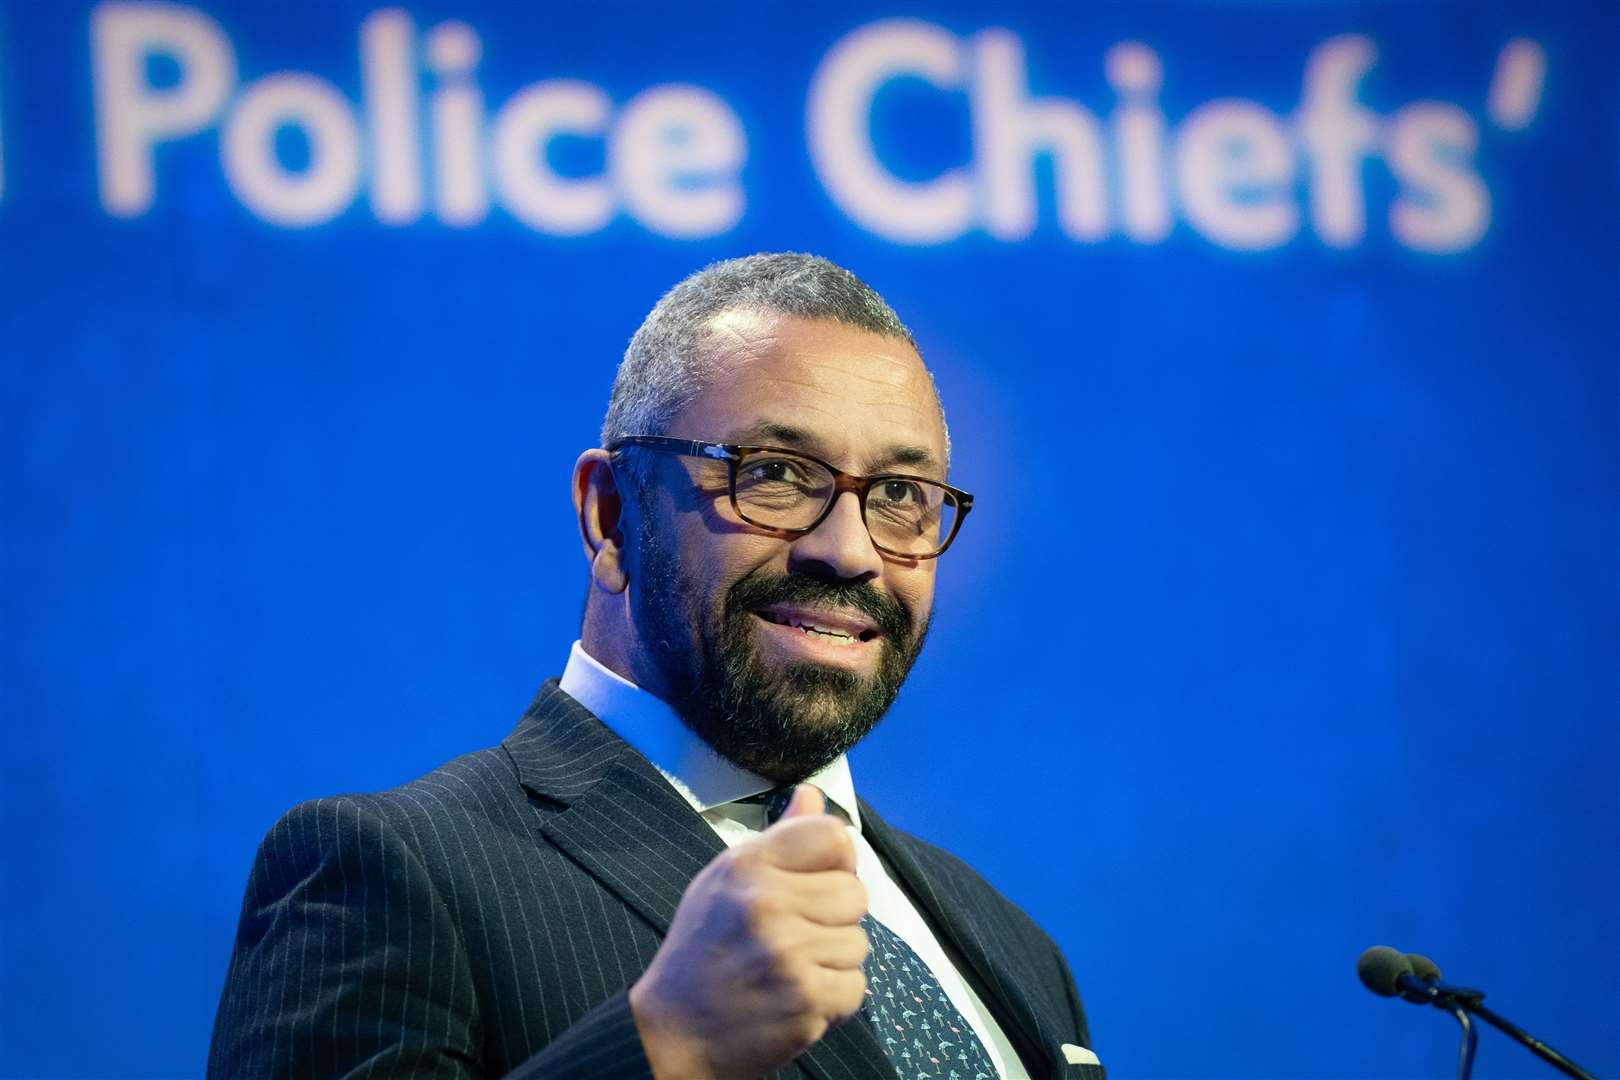 Home Secretary James Cleverly said he wanted the Met to address concerns from the Jewish community (Stefan Rousseau/PA)